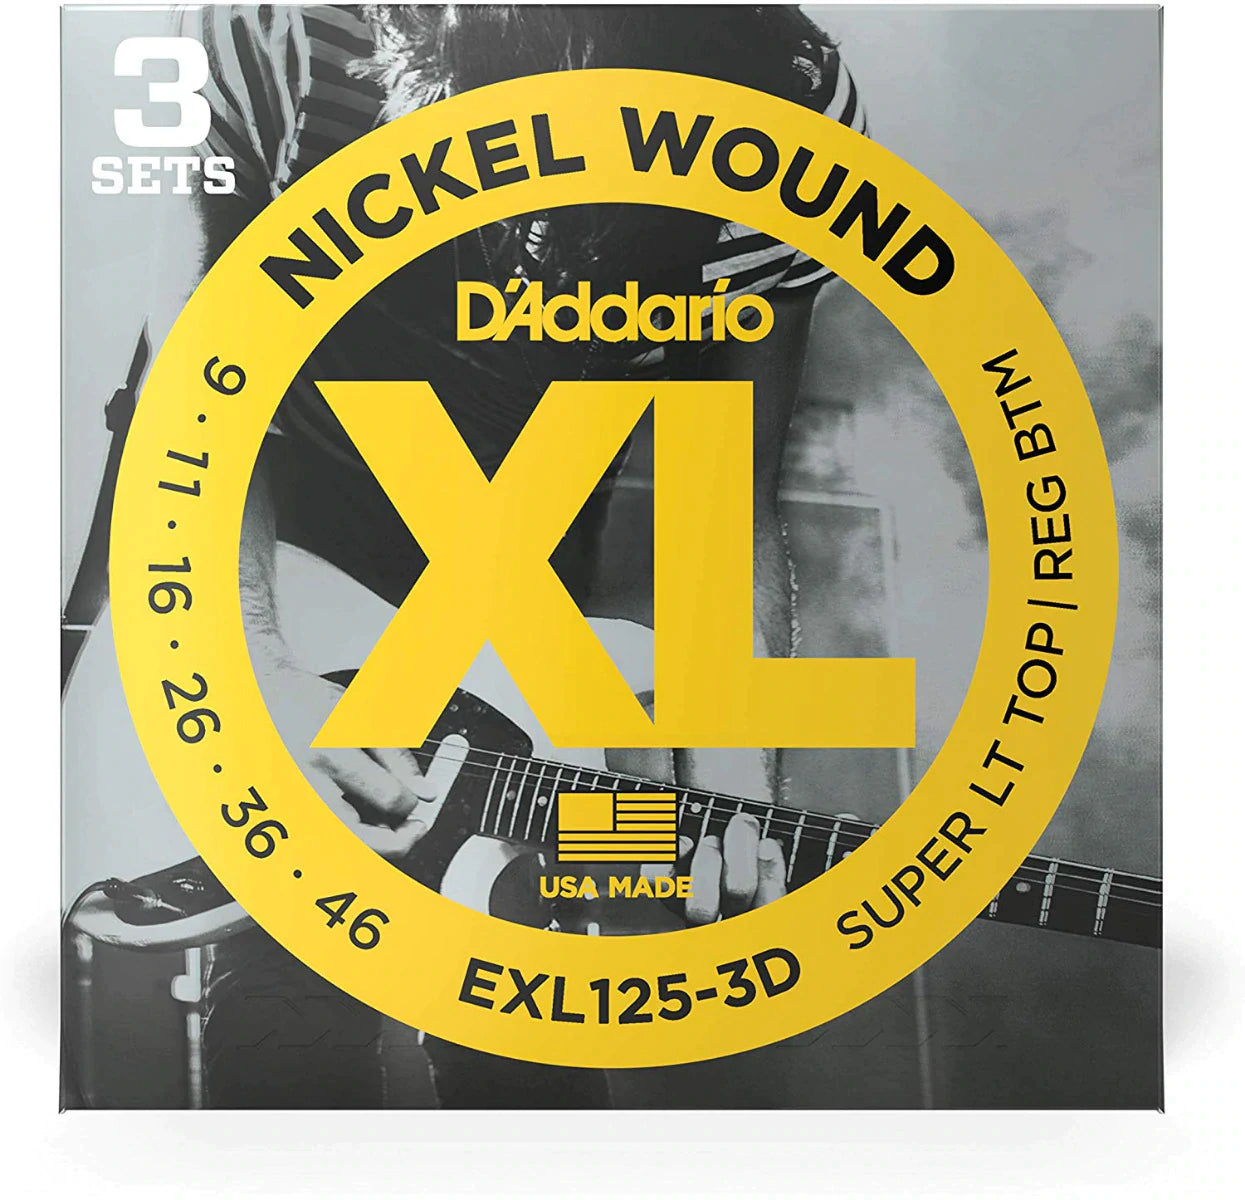 EXL1253D-daddario-nickel-wound-electric-guitar-strings-hybrid-theacousticroom-hamilton-3pack